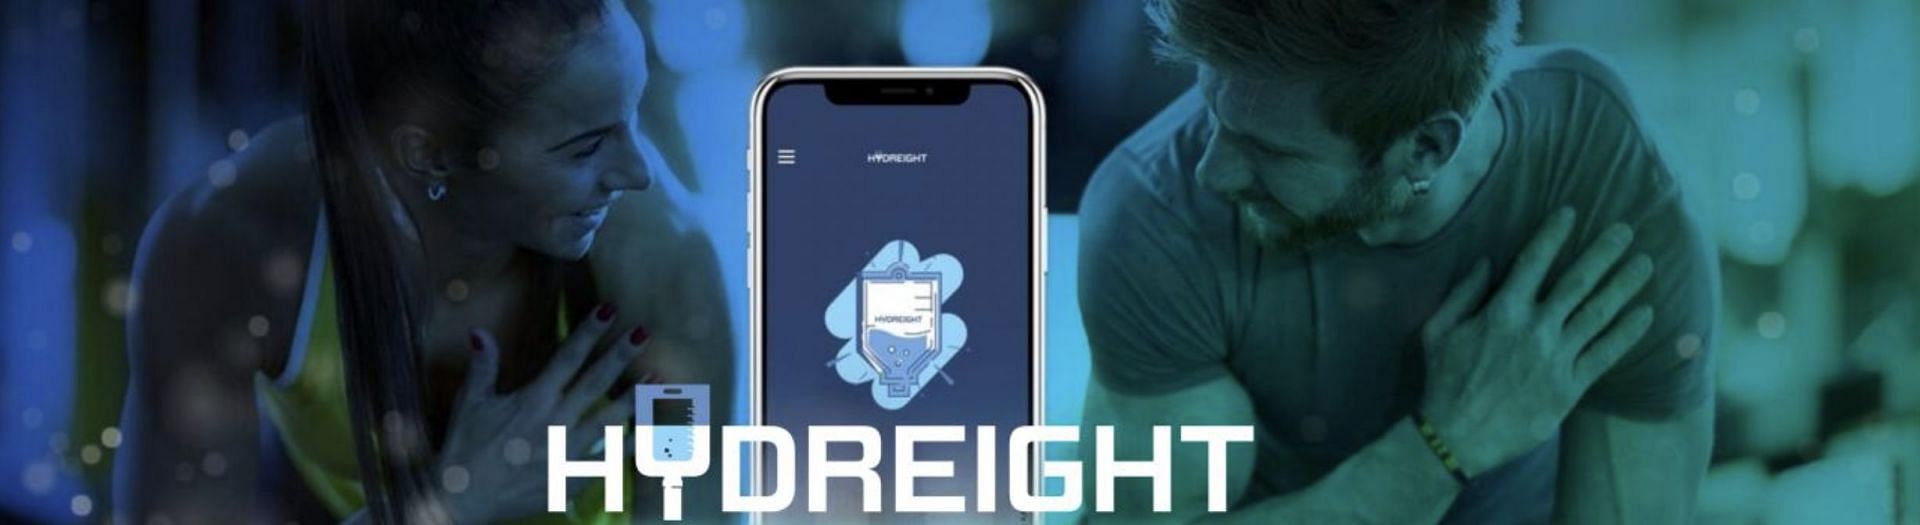 The concept of Hydreight Nurses explored as the TikTok page goes viral. (Image via Hydreight)